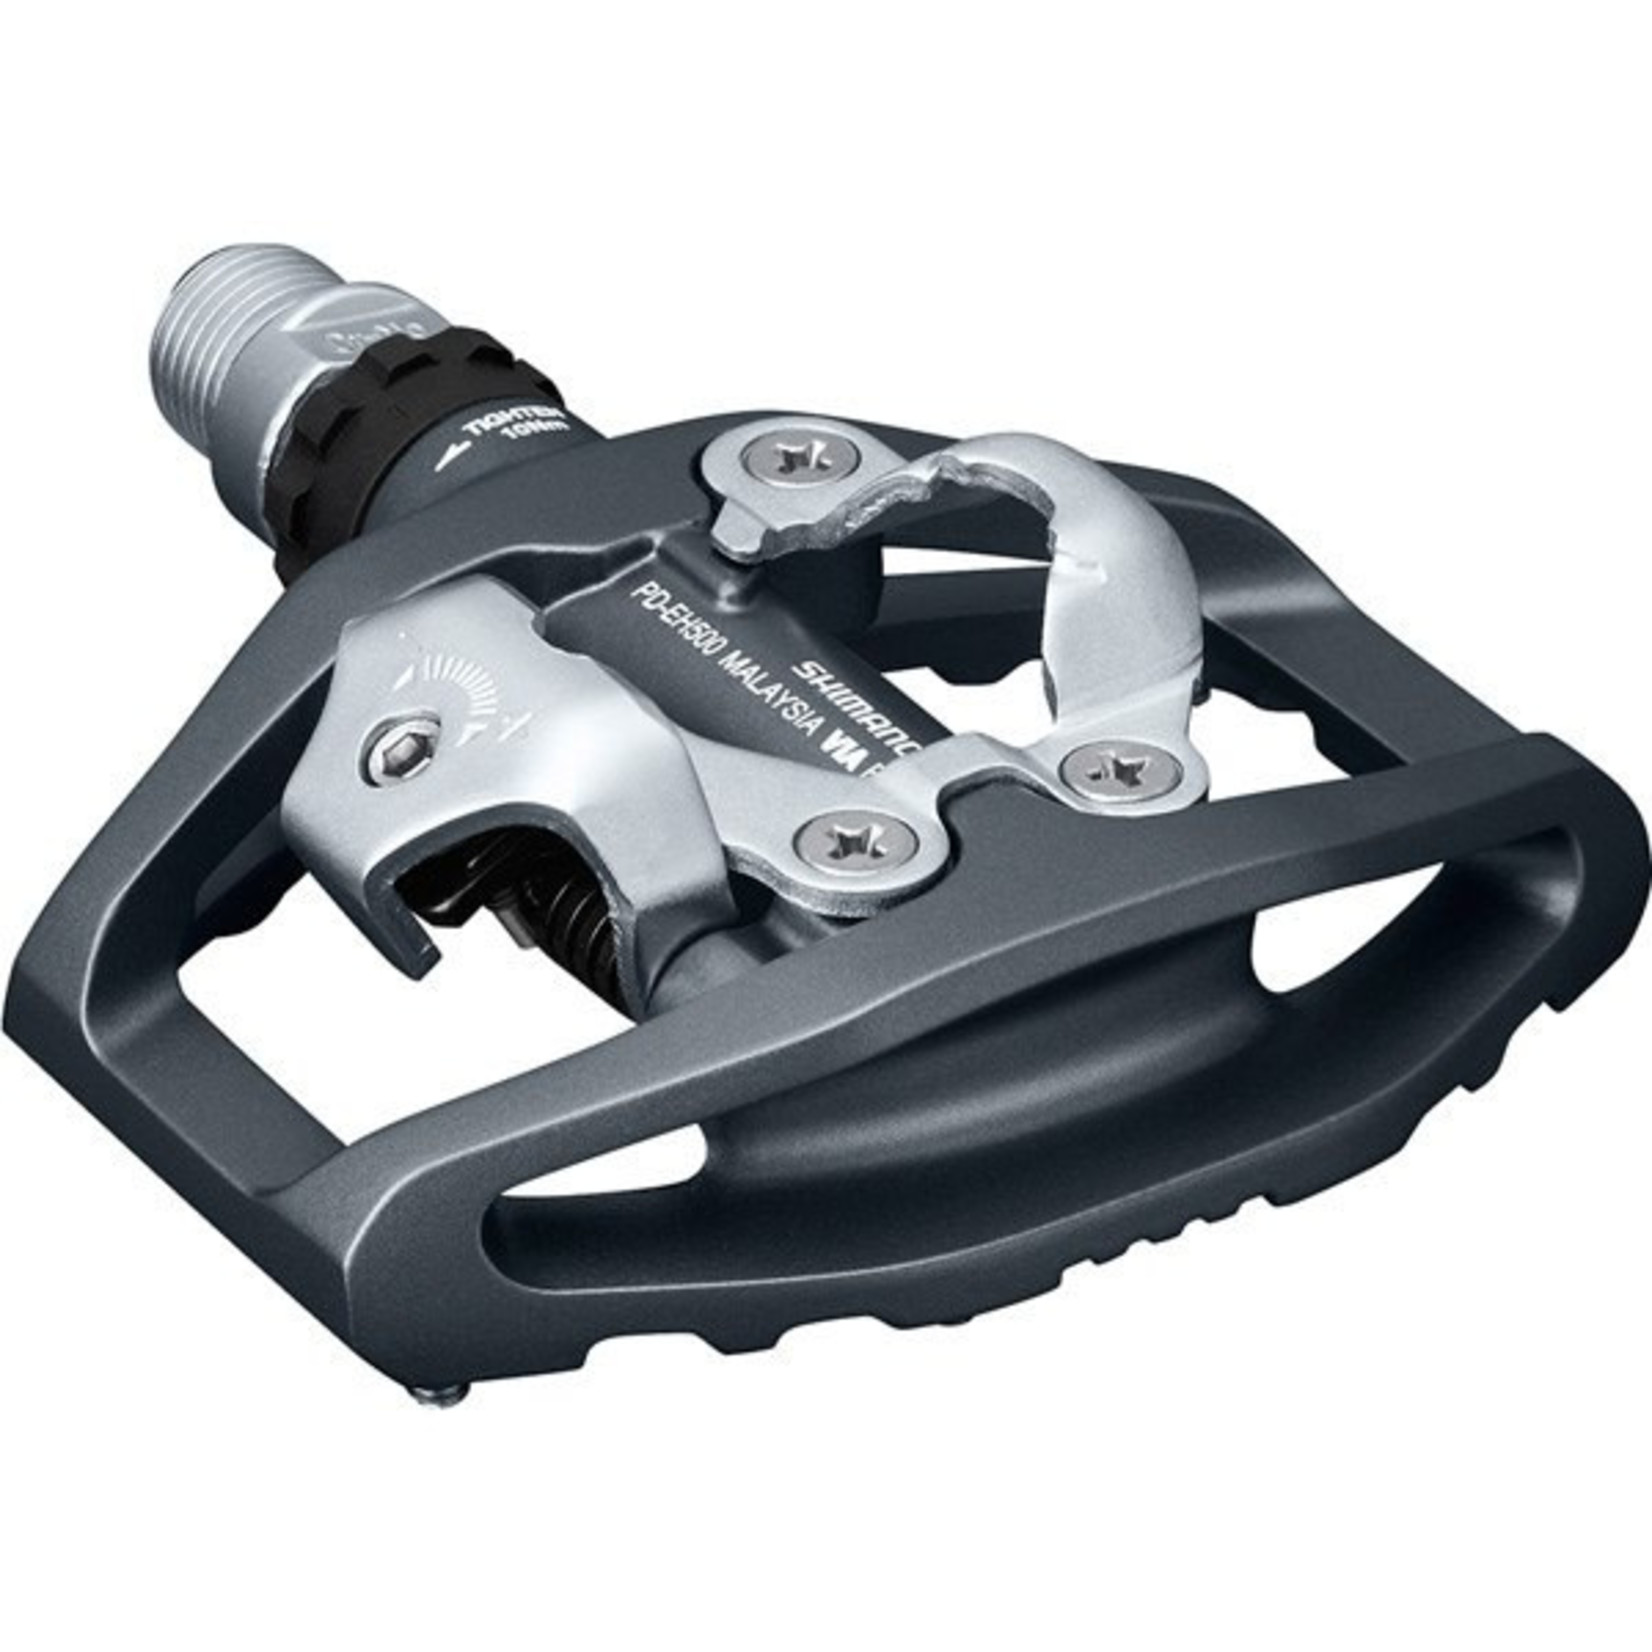 Shimano PD-EH500 SPD Pedals - Flat/Cleat Combo